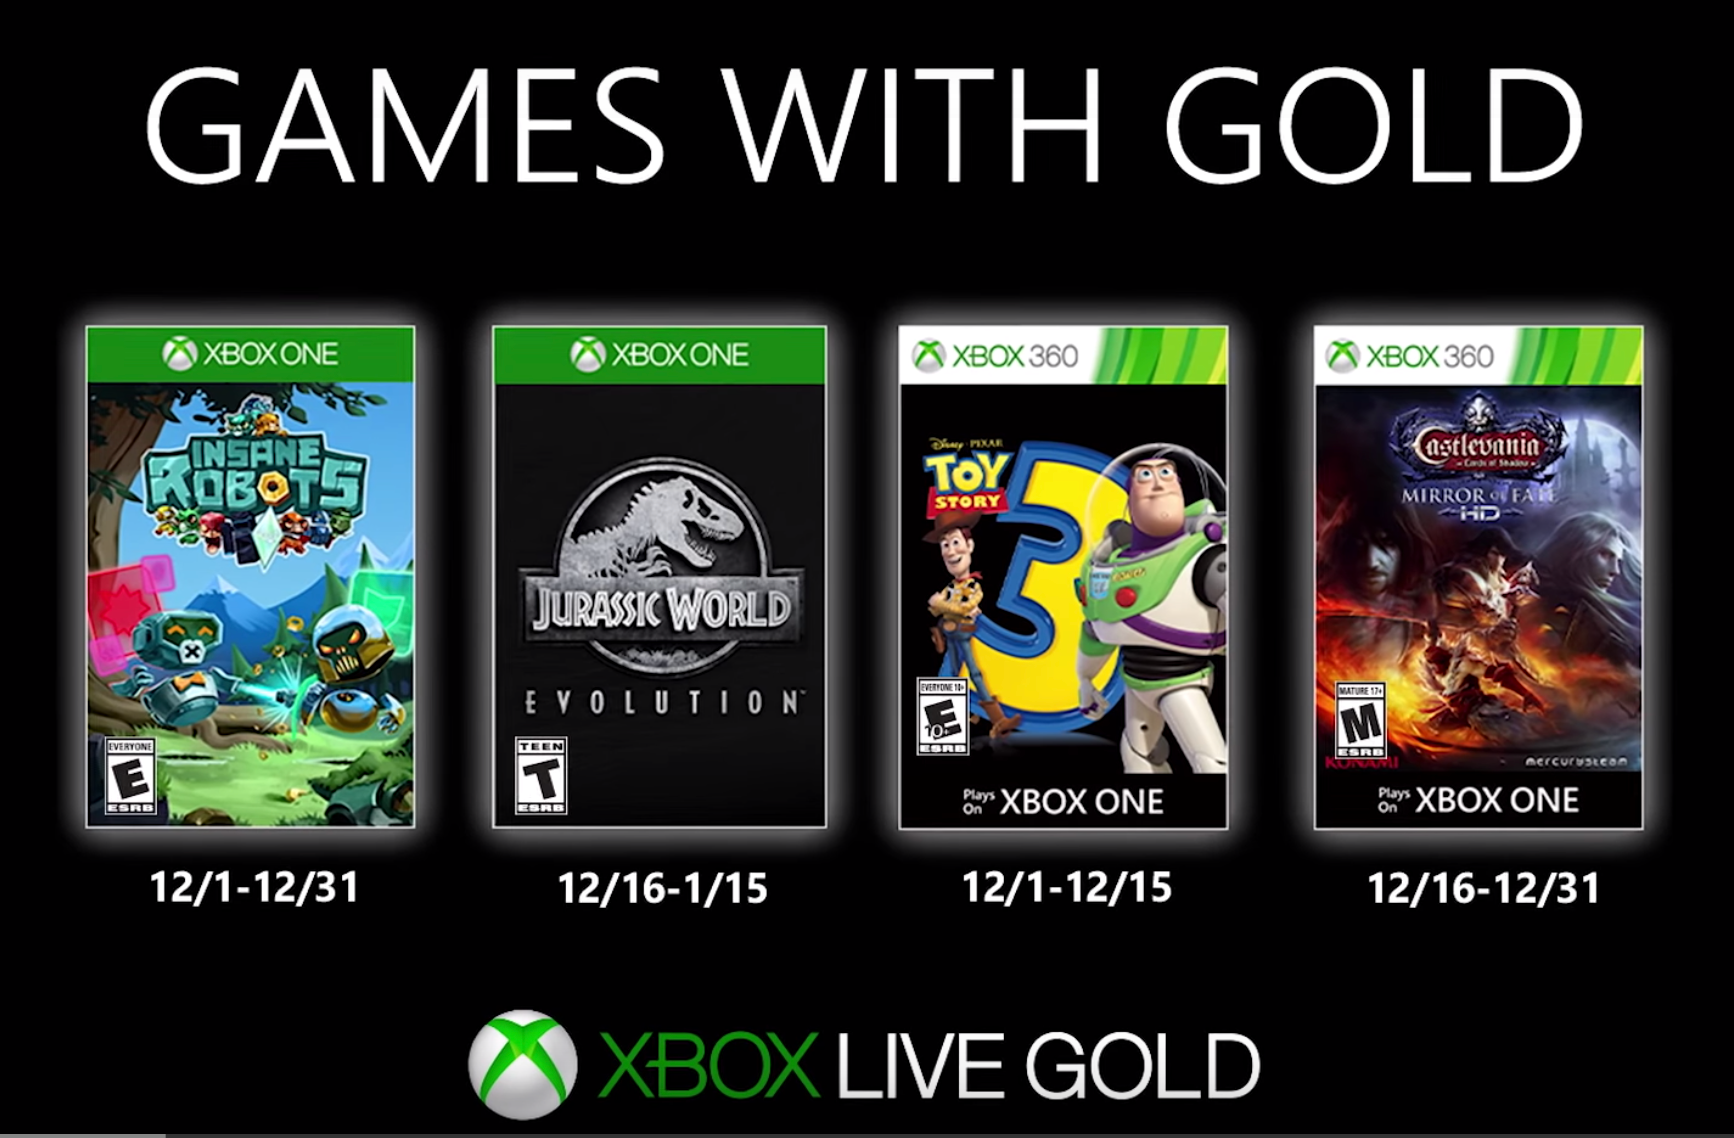 Image for December Games with Gold – Dracula, Dinosaurs + More